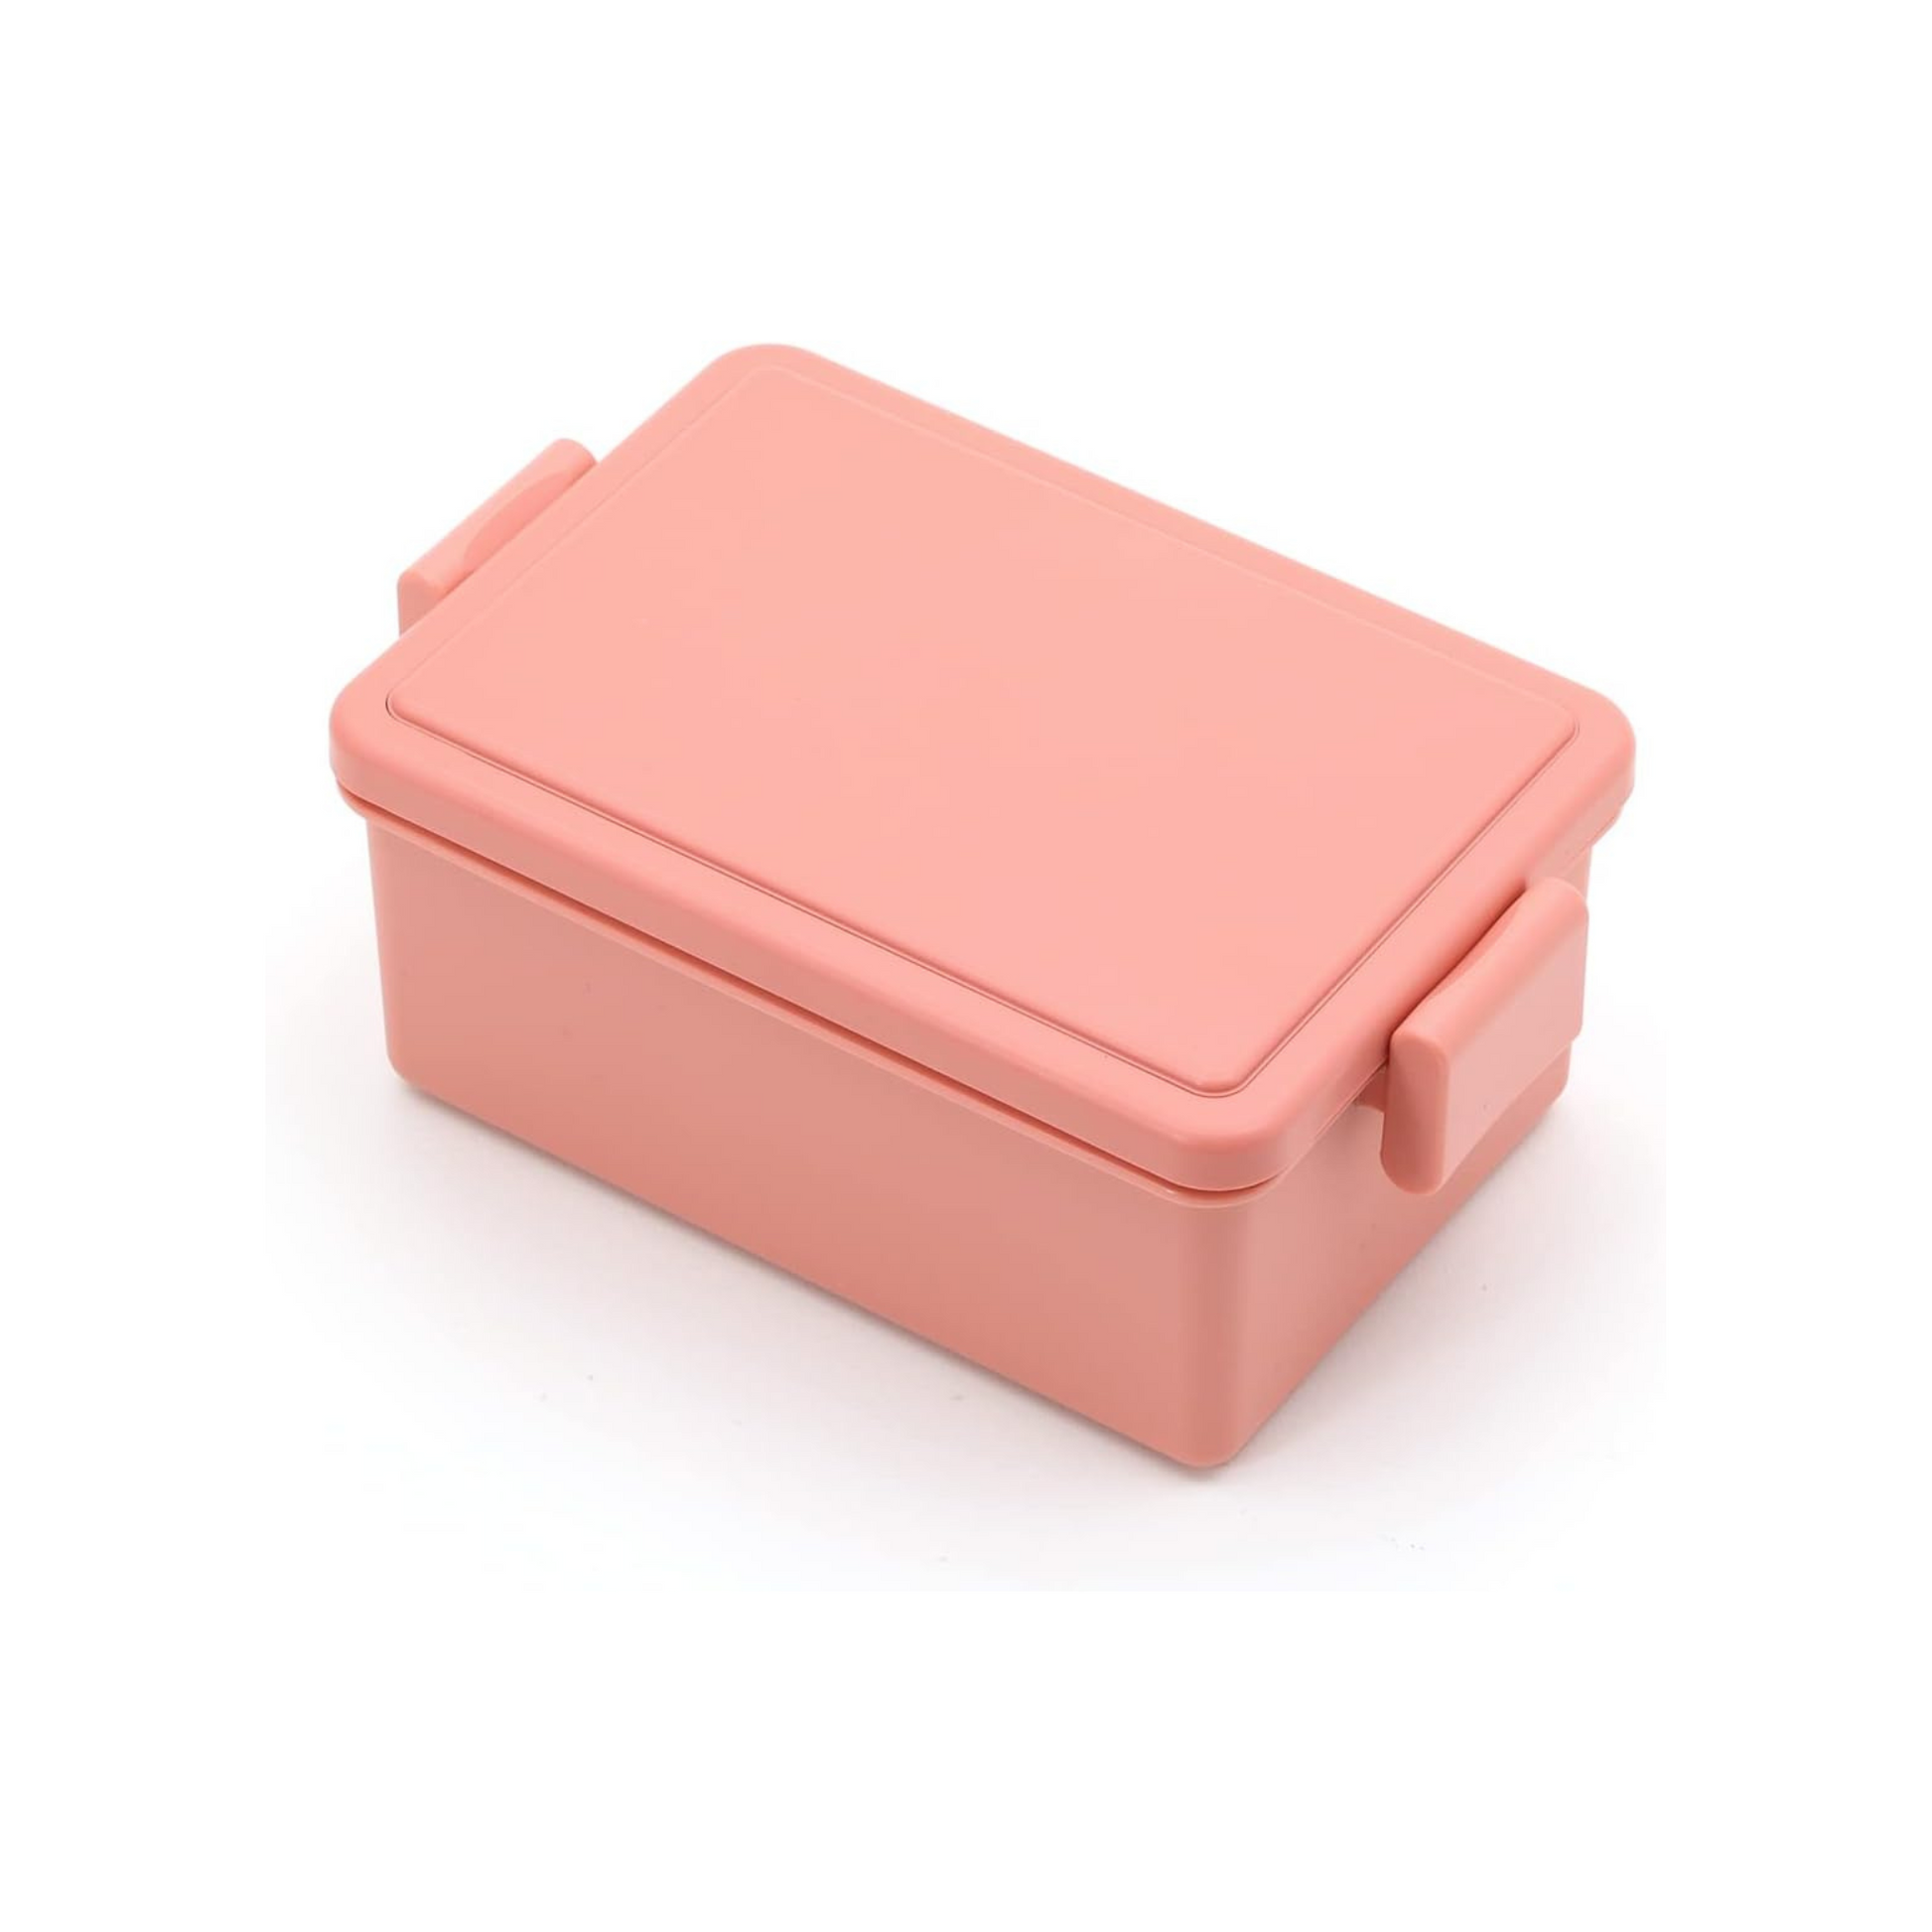 Our Place Lunch Box Set Containers Silverware Chopsticks Pink